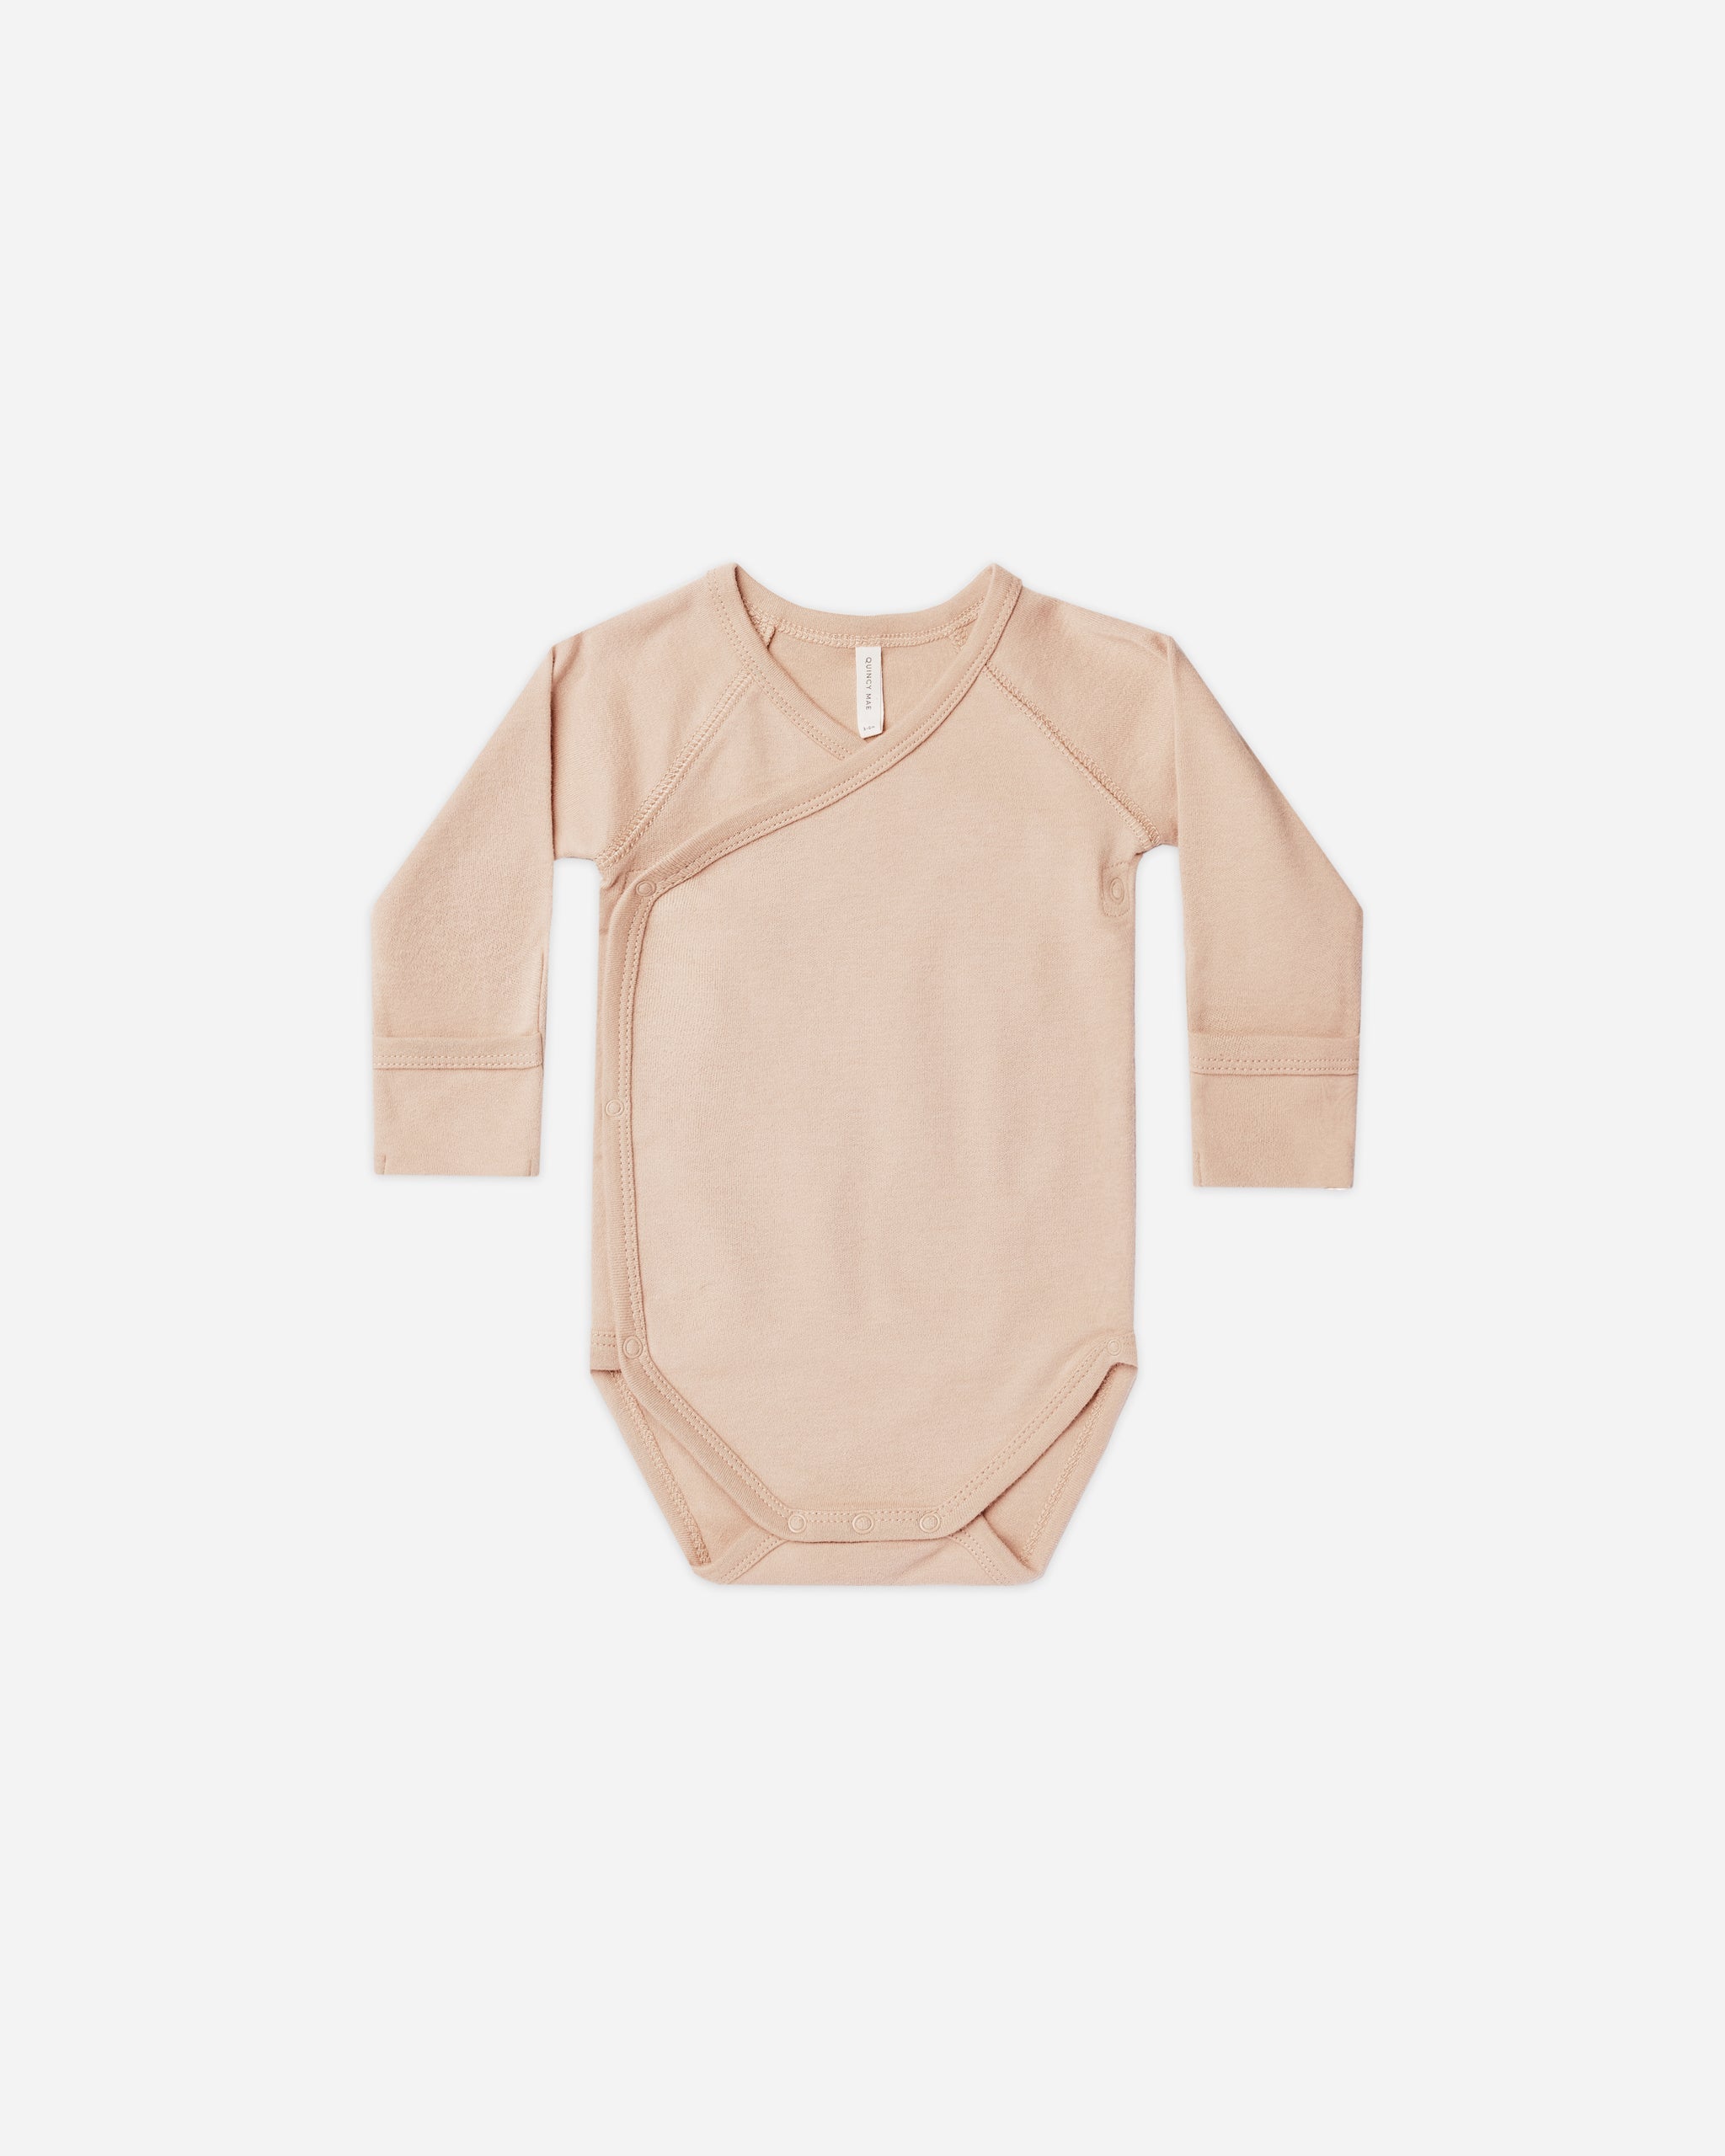 Side-Snap Bodysuit || Shell - Rylee + Cru | Kids Clothes | Trendy Baby Clothes | Modern Infant Outfits |